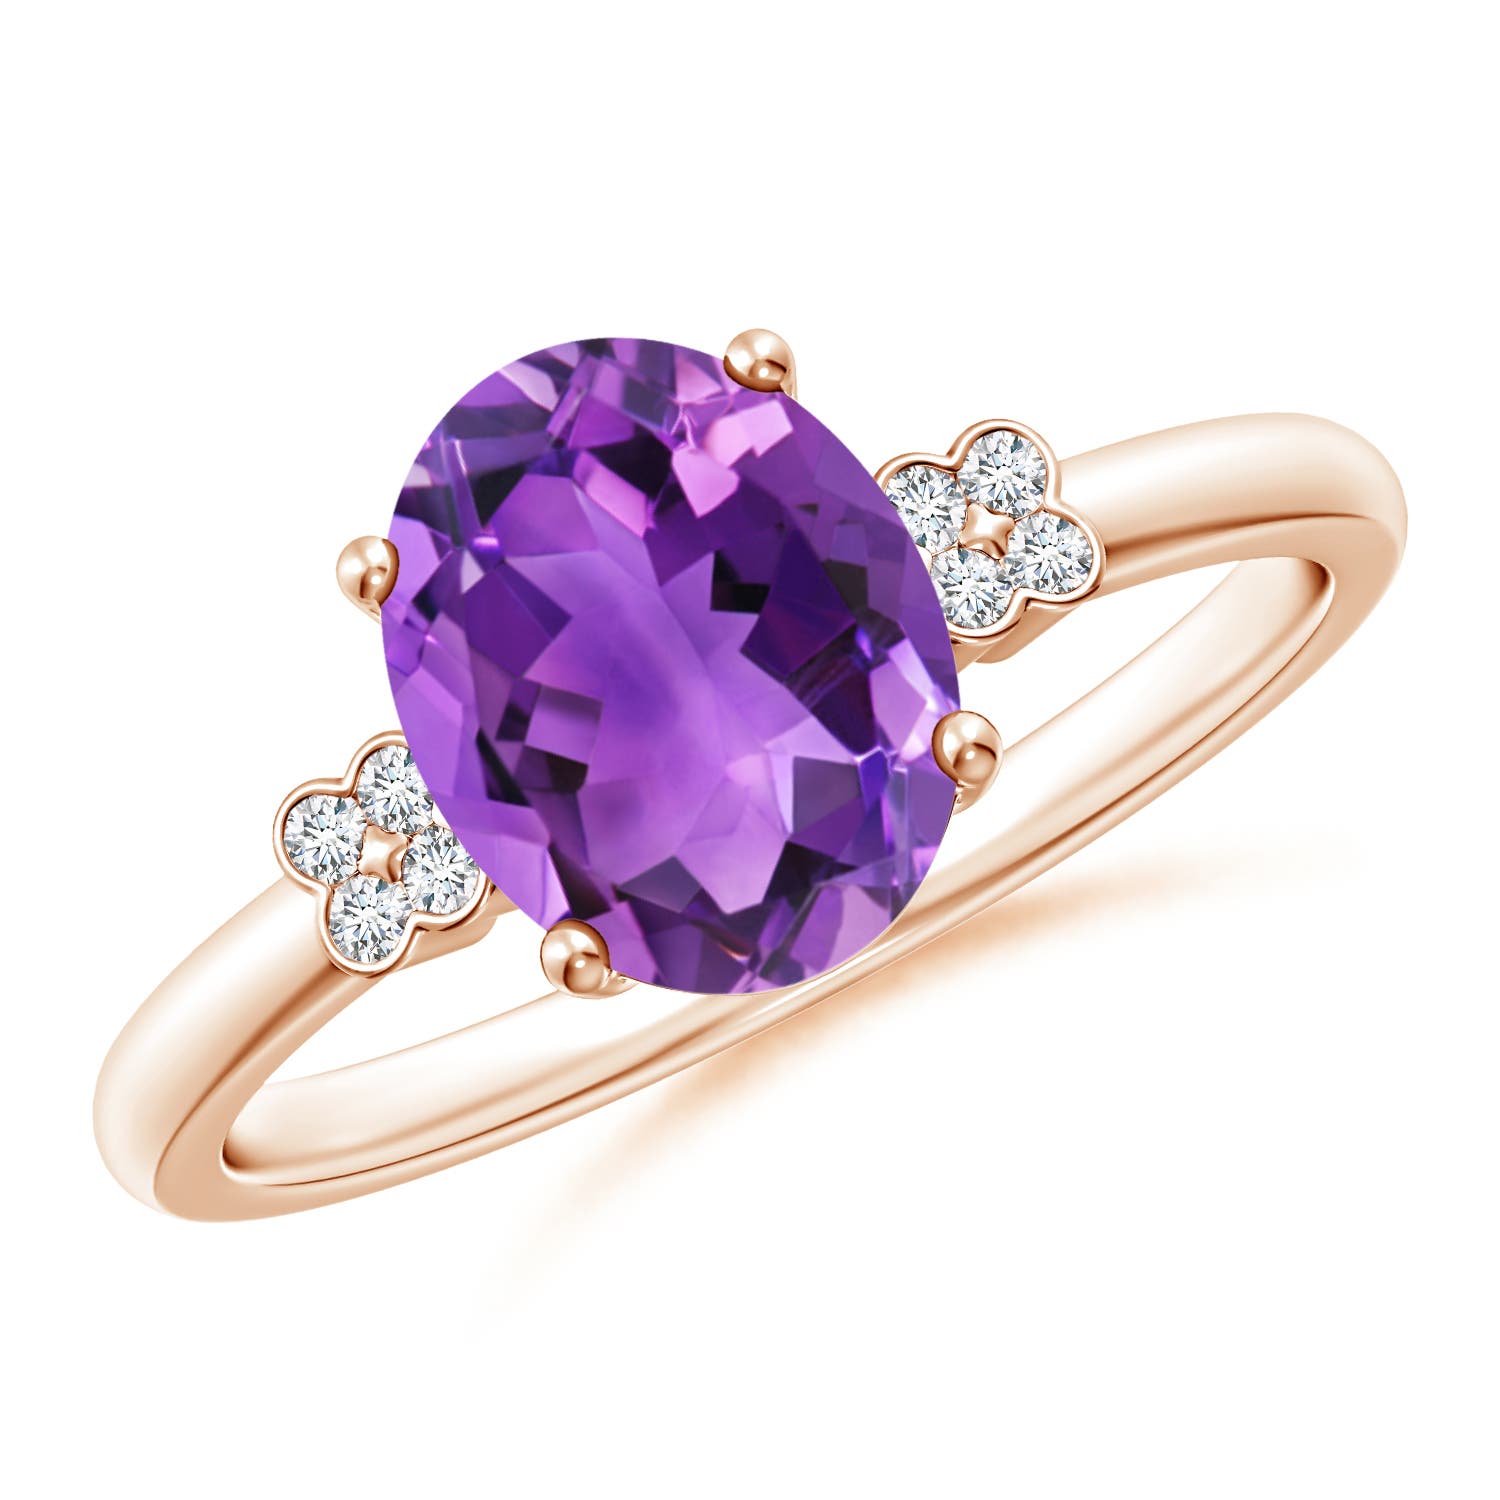 AAA- Amethyst / 1.66 CT / 14 KT Rose Gold